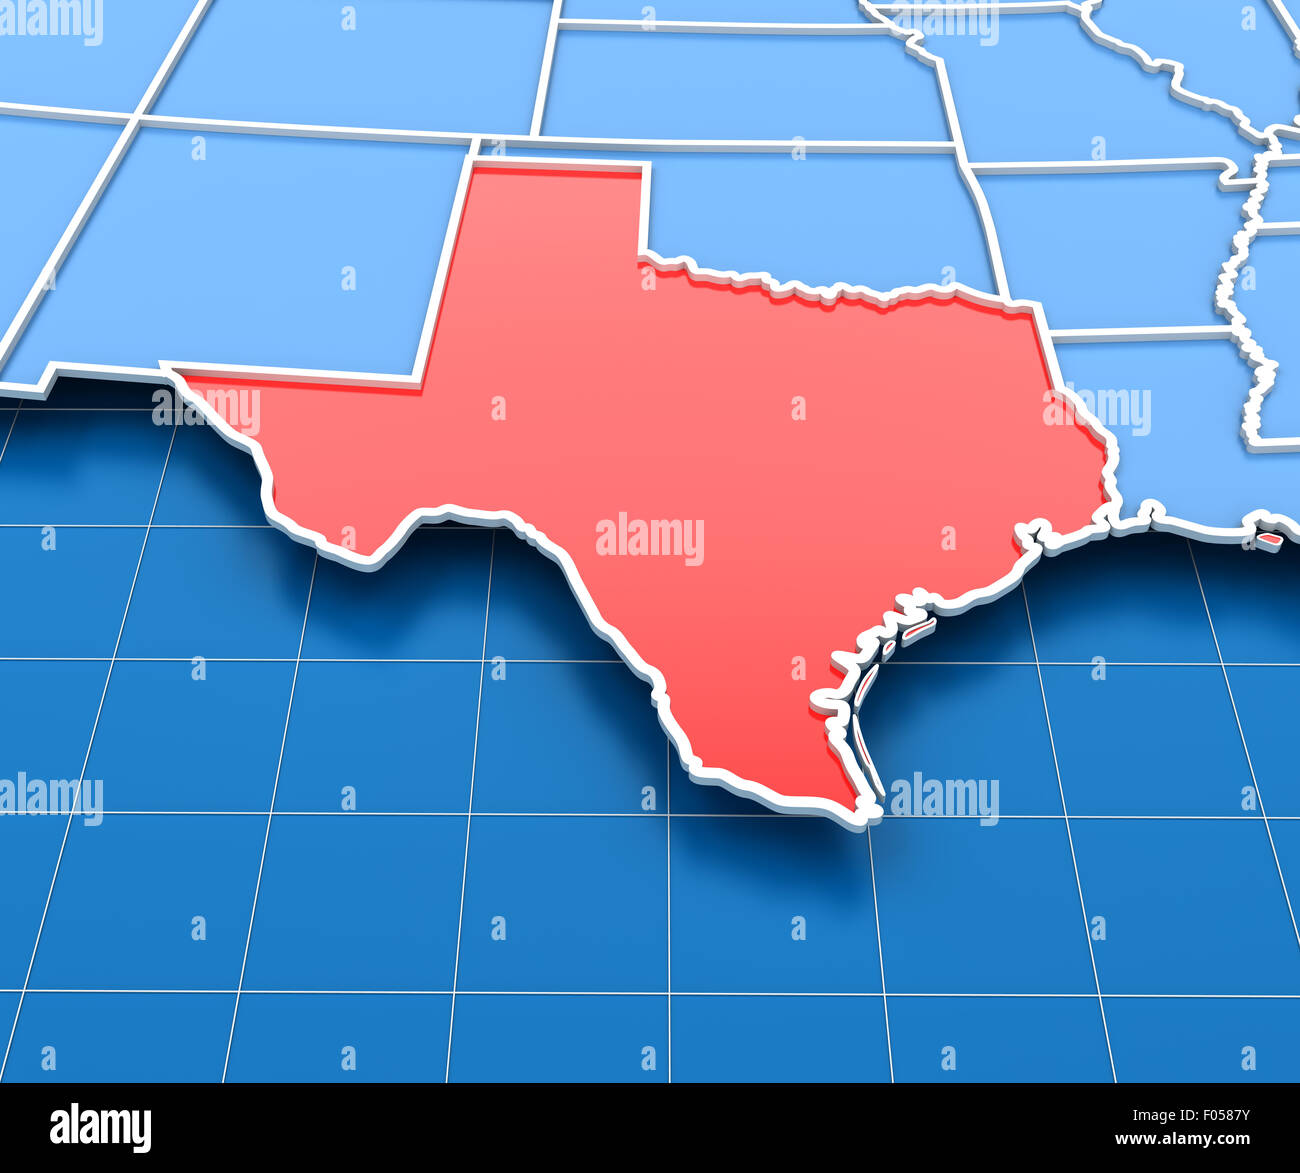 3d render of USA map with Texas state highlighted Stock Photo